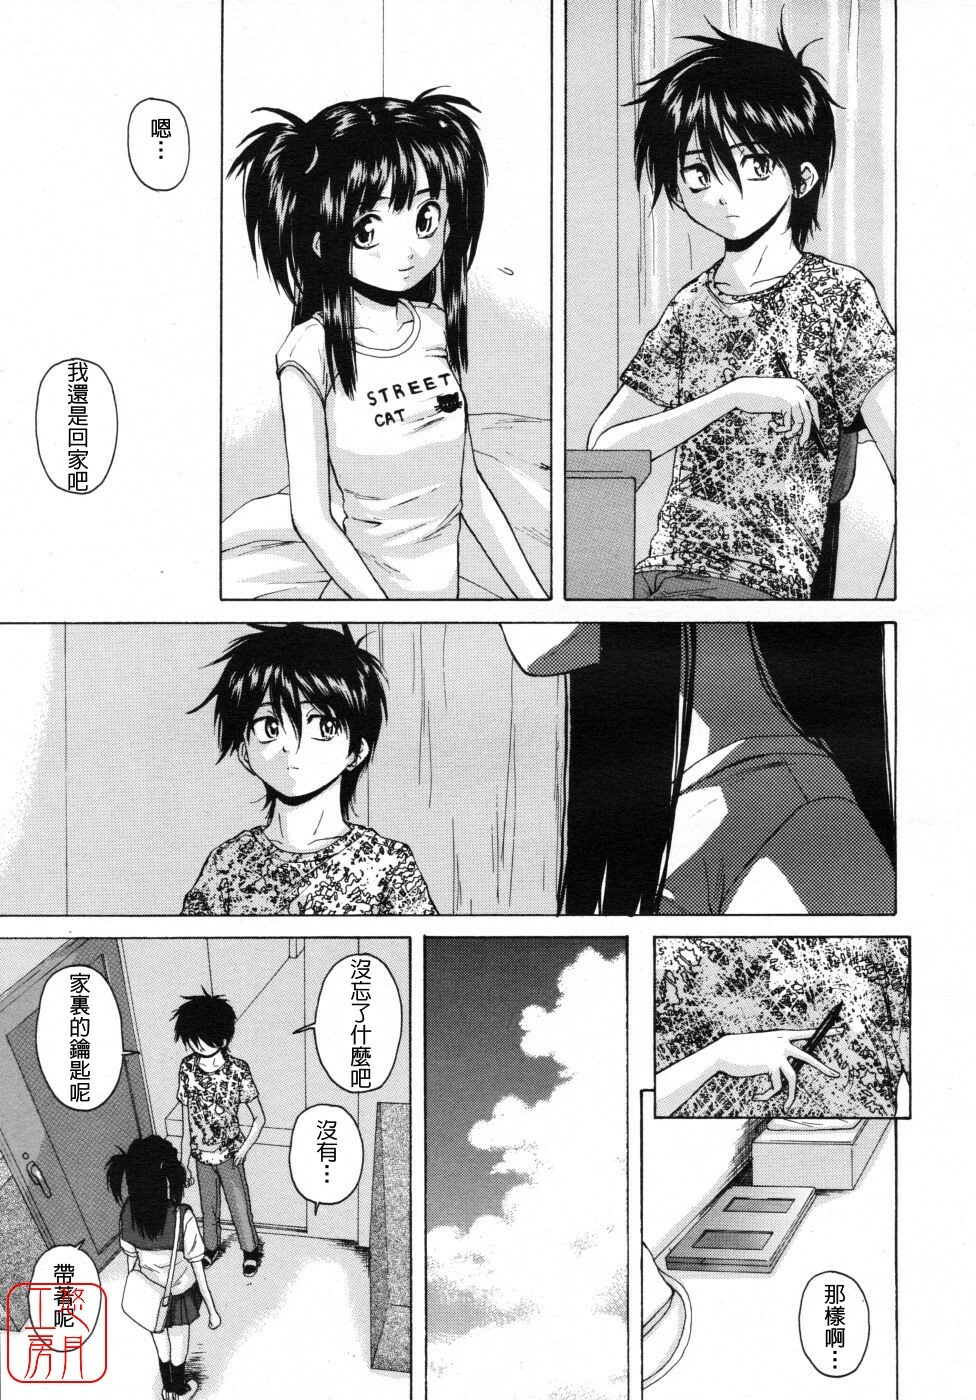 [Fuuga] Girl Friend 2 (Chinese) page 11 full